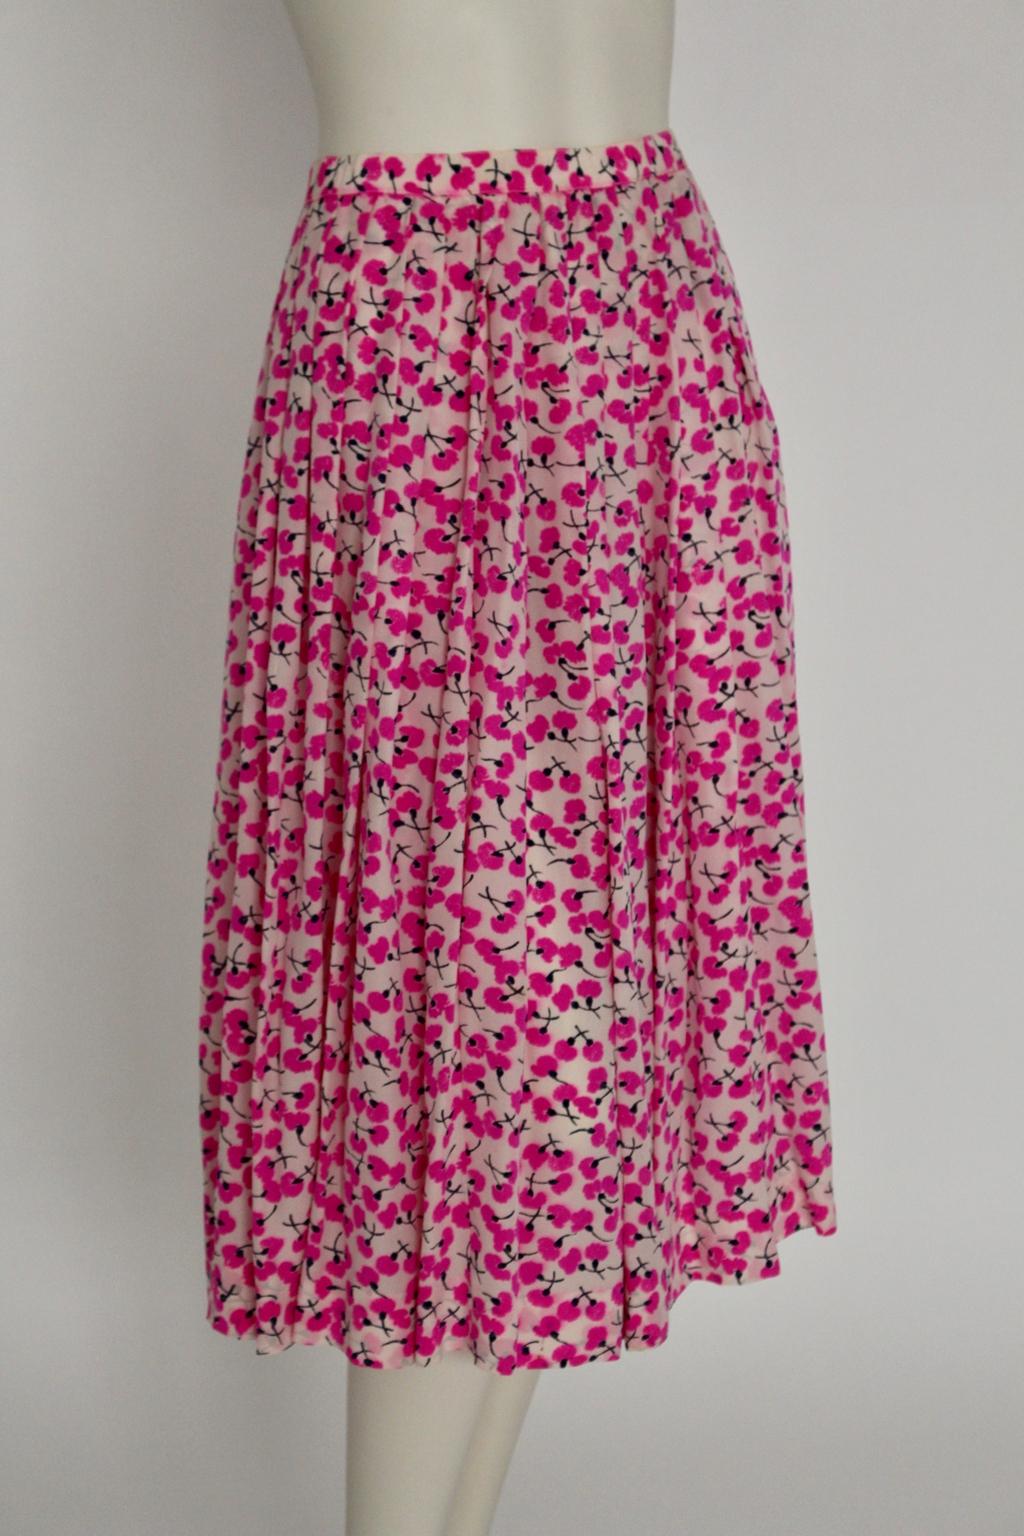 Yves Saint Laurent Rive Gauche Silk Skirt, 1980s  In Excellent Condition For Sale In Vienna, AT